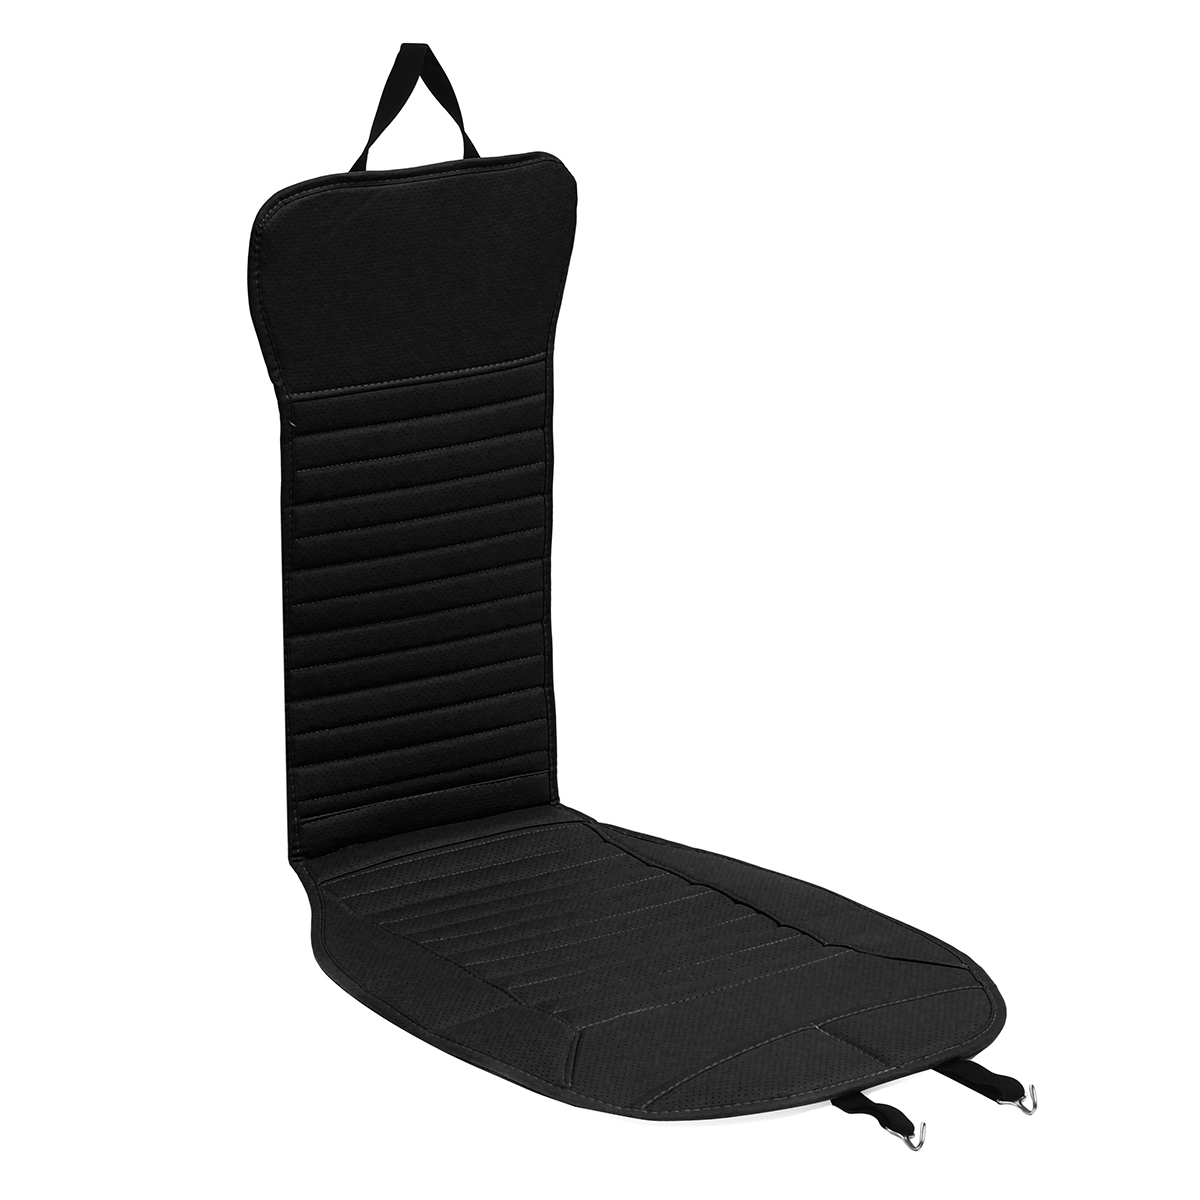 125x50cm-PU-Leather-Car-Seat-Cushion-Cover-Chair-Protector-Mat-Pad-Universal-1415384